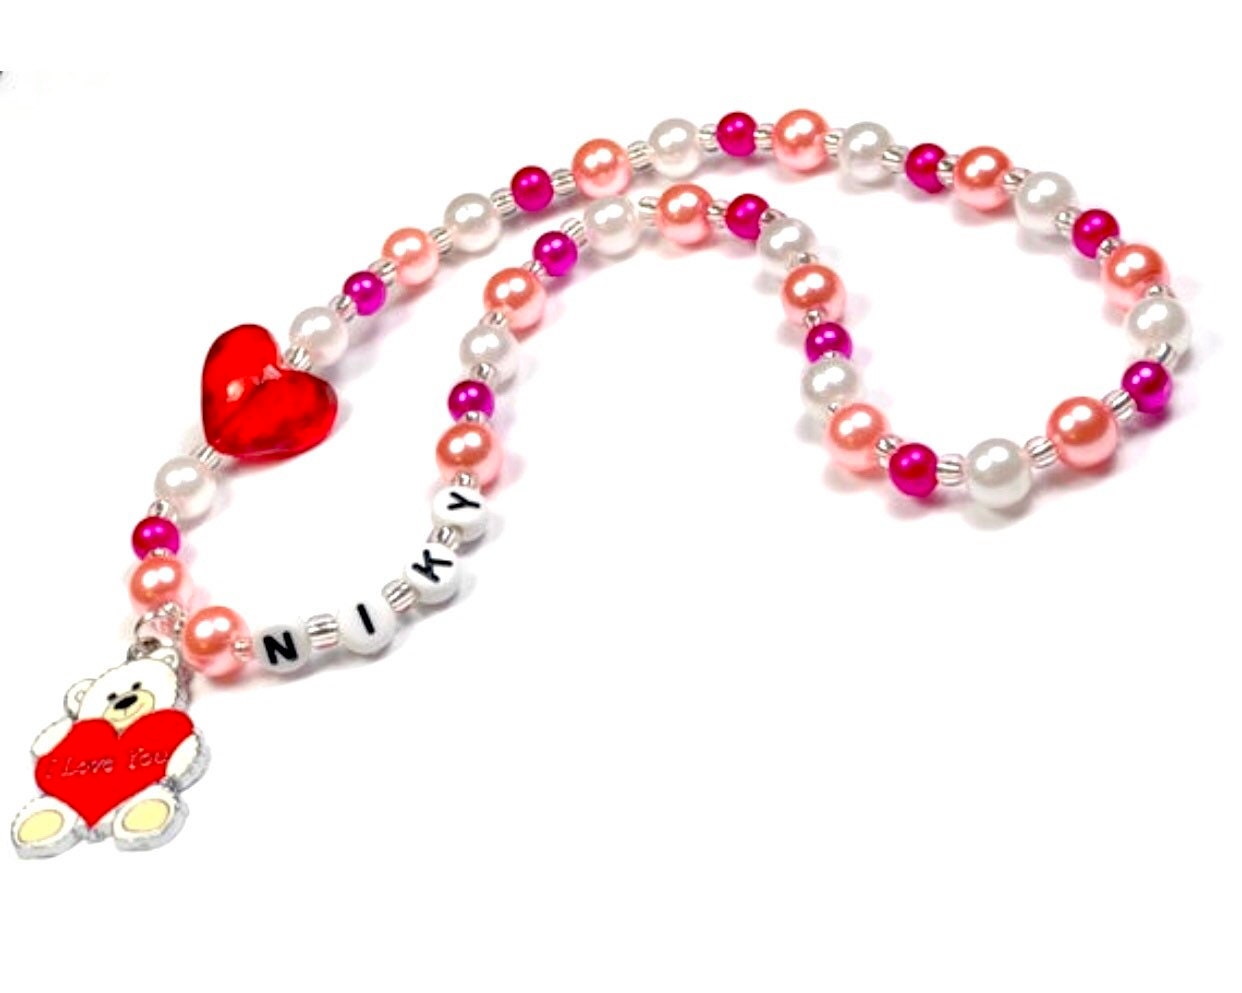 Valentines day necklace for girls /  Heart beaded necklace for kids / Toddler bear necklace / Pearl necklace girl